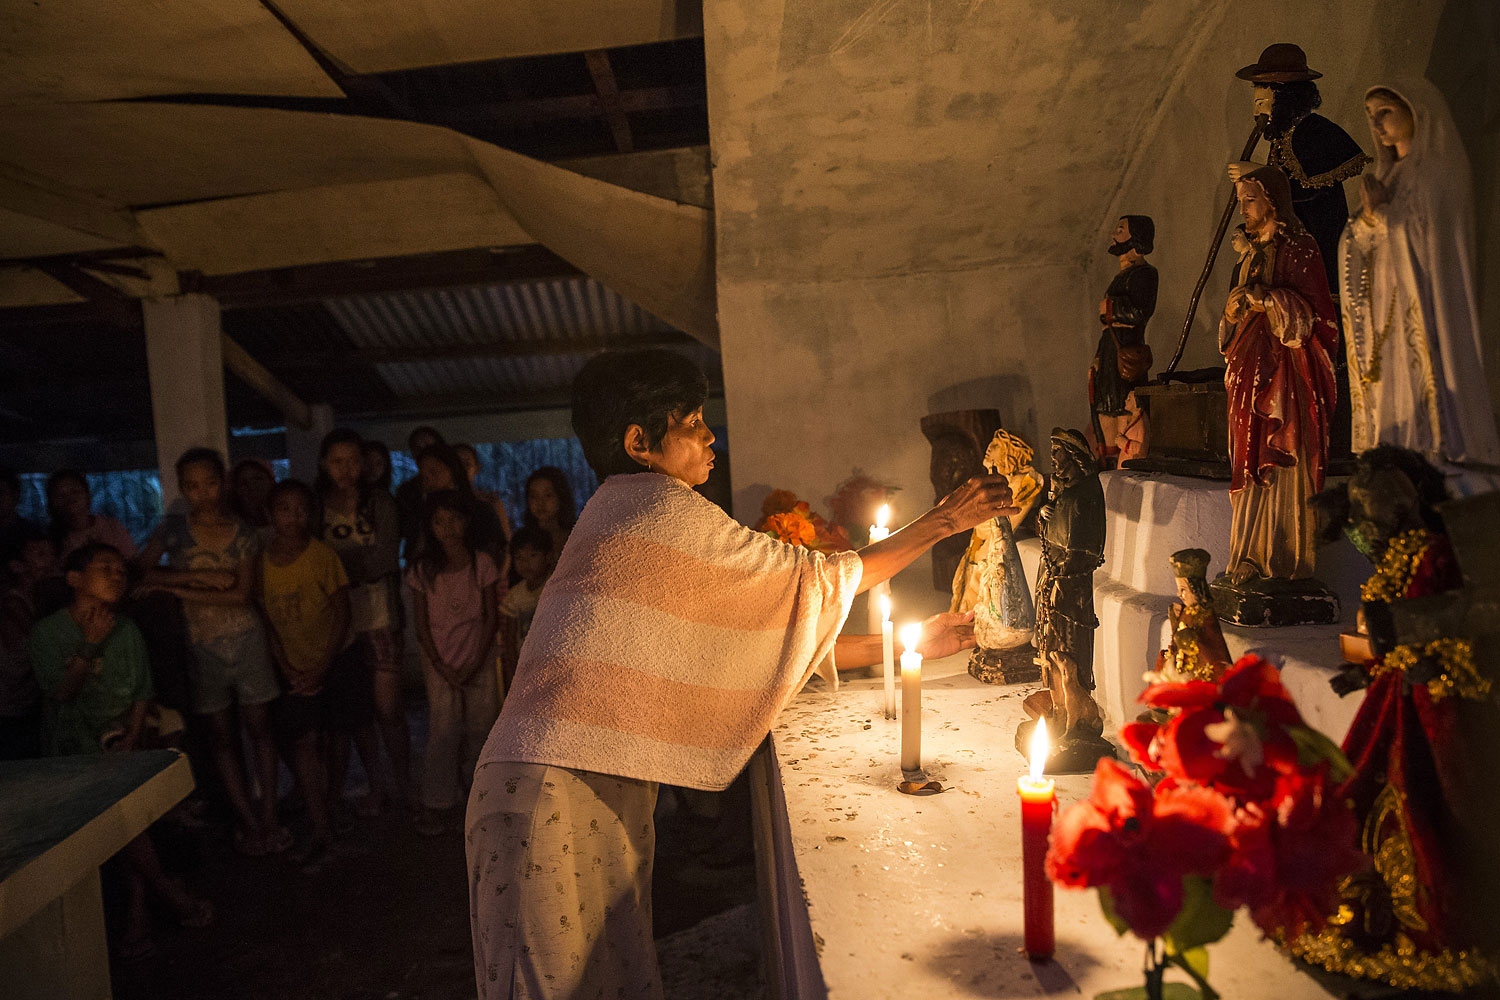 A woman arranges religious statues during a Latin mass ceremony at a local Chapel in Santa Rita township on November 22, 2013 in Eastern Samar, Philippines.